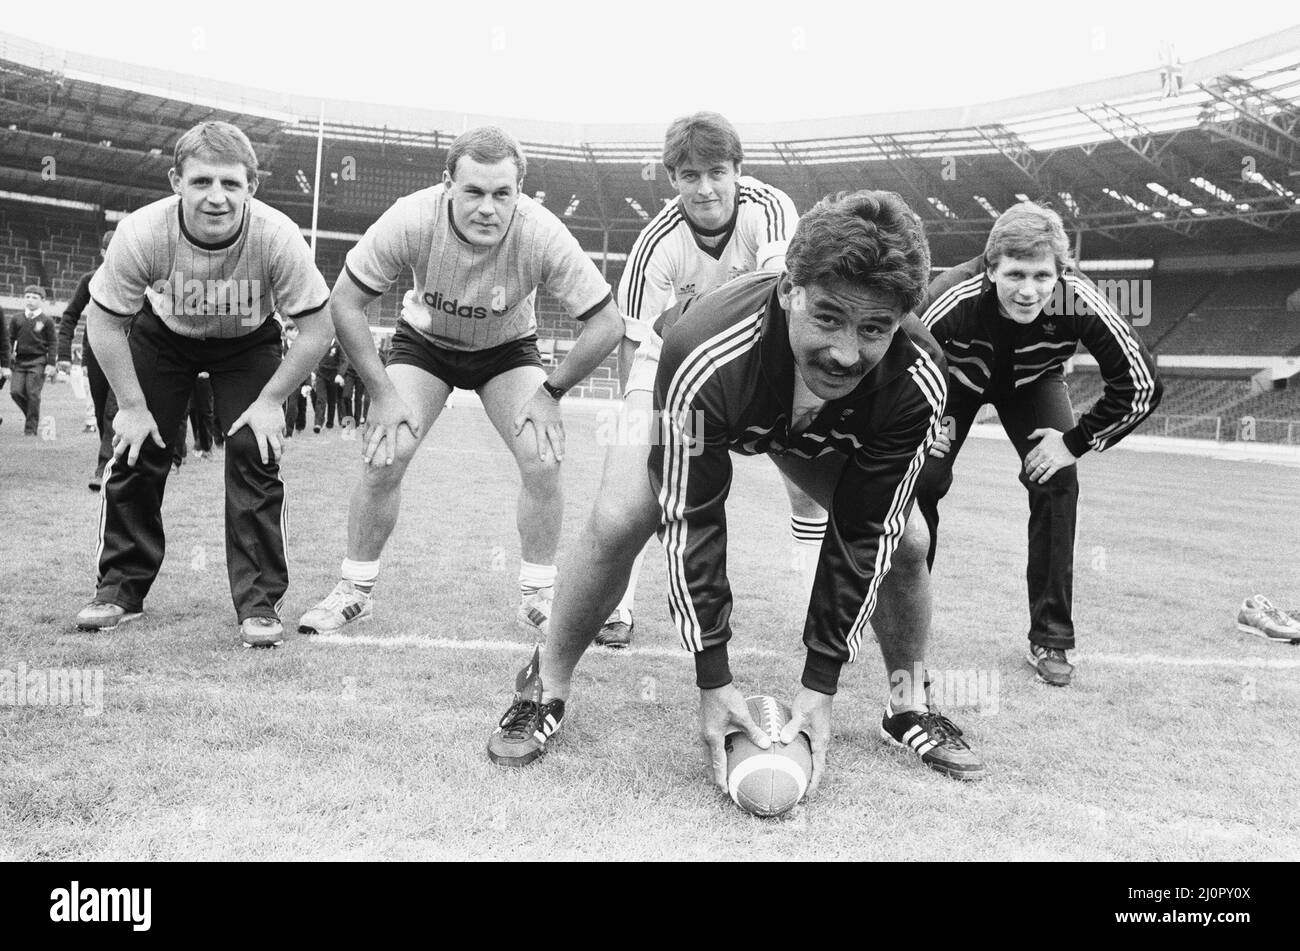 Trying Rugby the Ameriacn Way are Widnes players, front Kevin Tamati, Back left to right Andy Gregory, Mike O'Neill, Joe Lydon and John Bassnett, as they prepare on the Wembley pitch for the upcoming Rugby League Cup Final against Wigan. 5th May 1984 Stock Photo